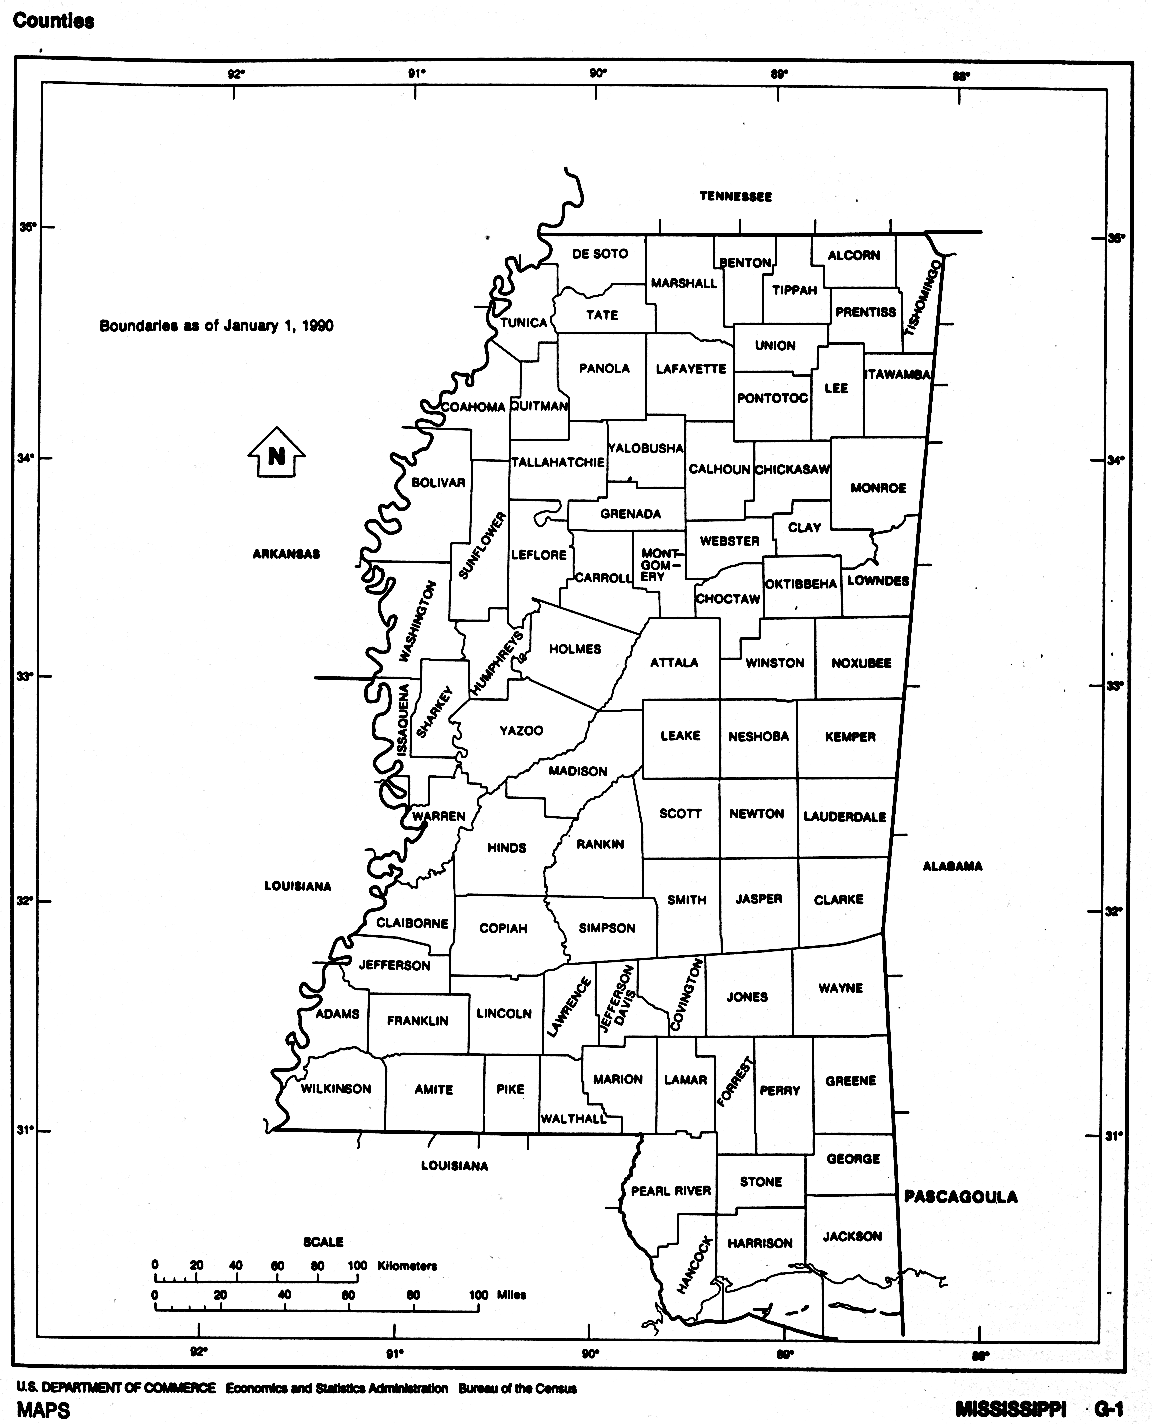 Mississippi USGS topo maps. Click here! free map of Mississippi state,